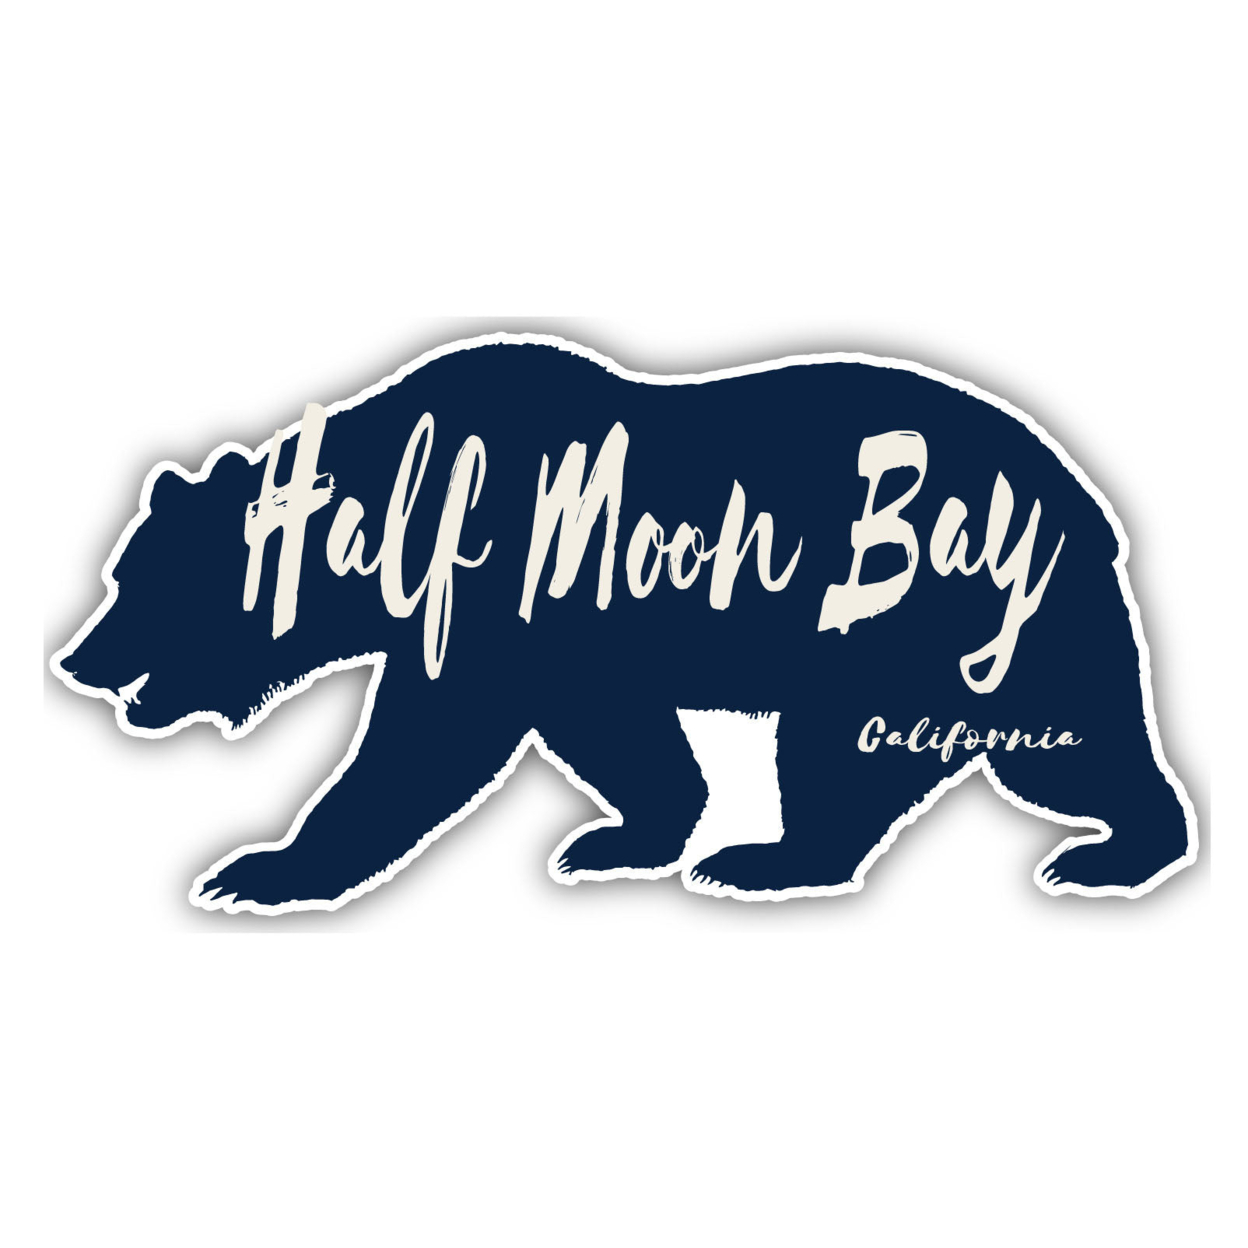 Half Moon Bay California Souvenir Decorative Stickers (Choose Theme And Size) - 4-Pack, 12-Inch, Camp Life